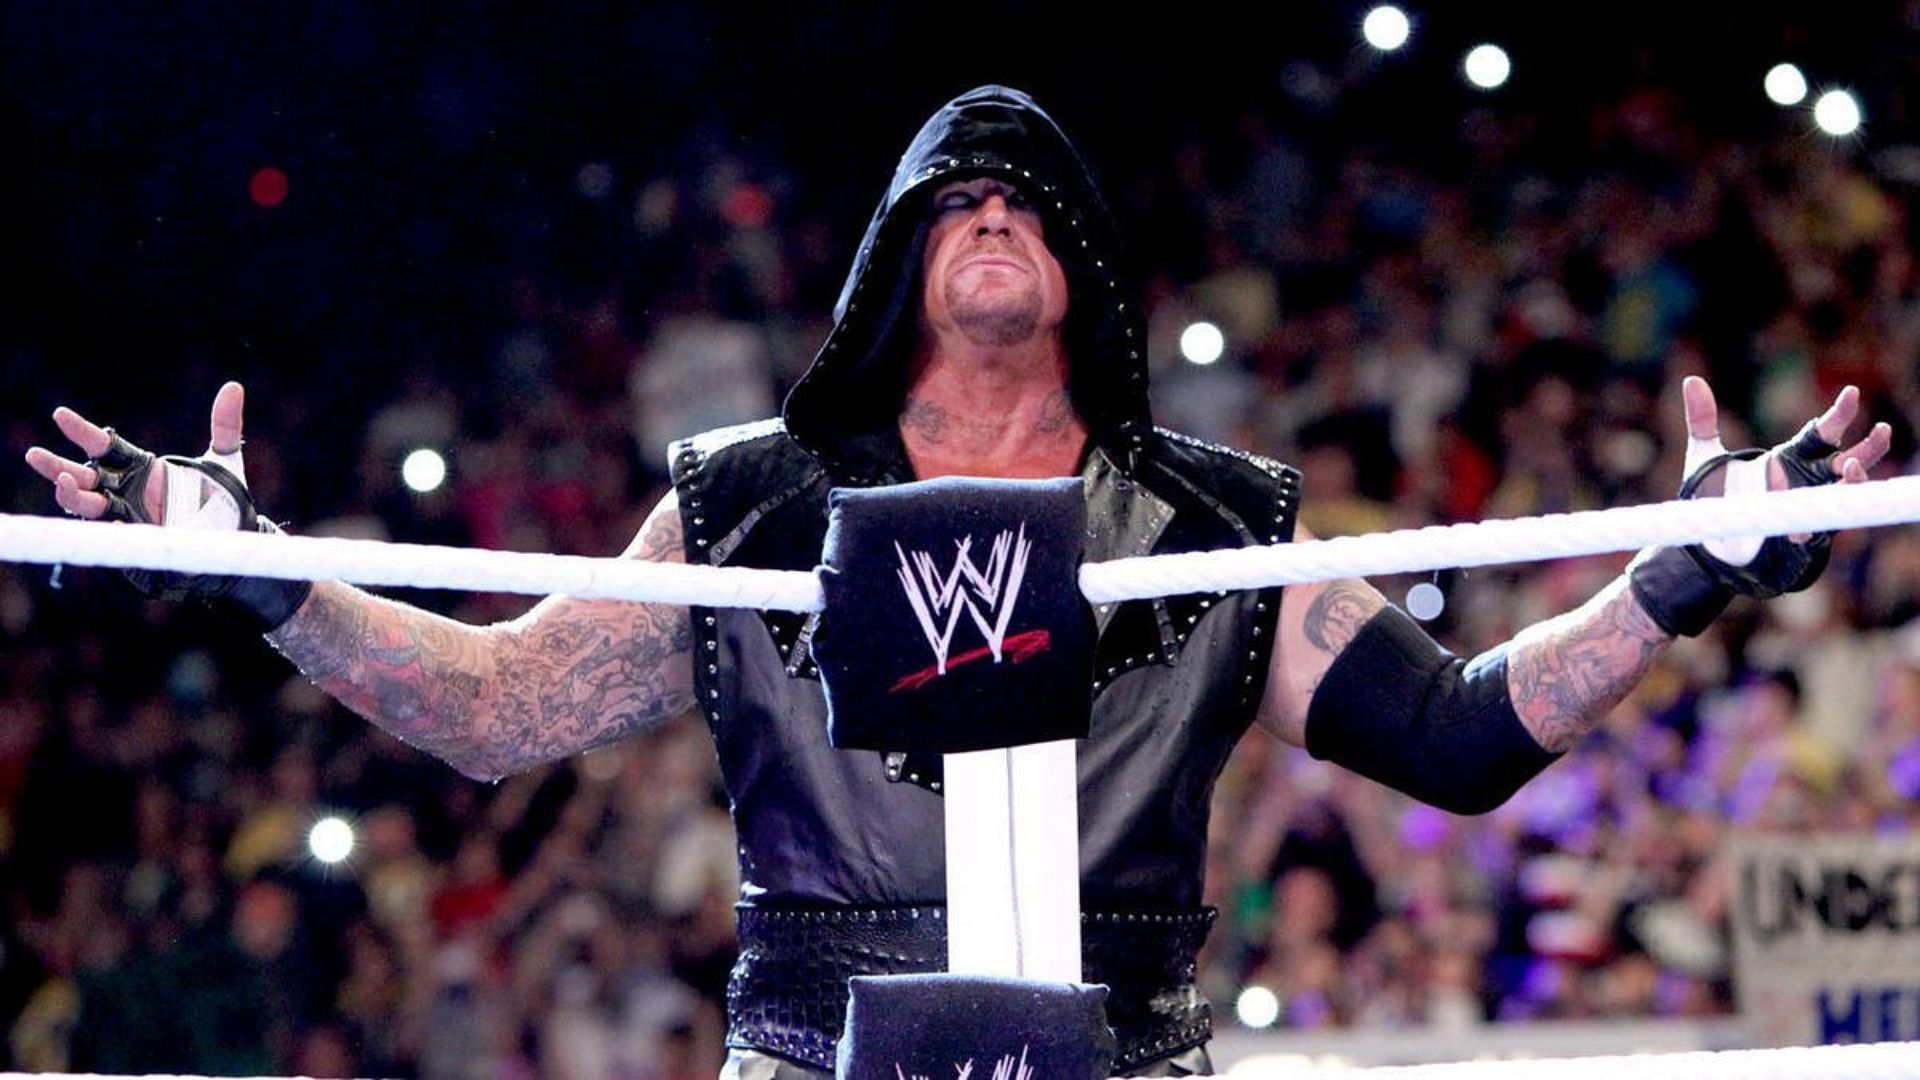 The Undertaker recently signed a new contract with WWE